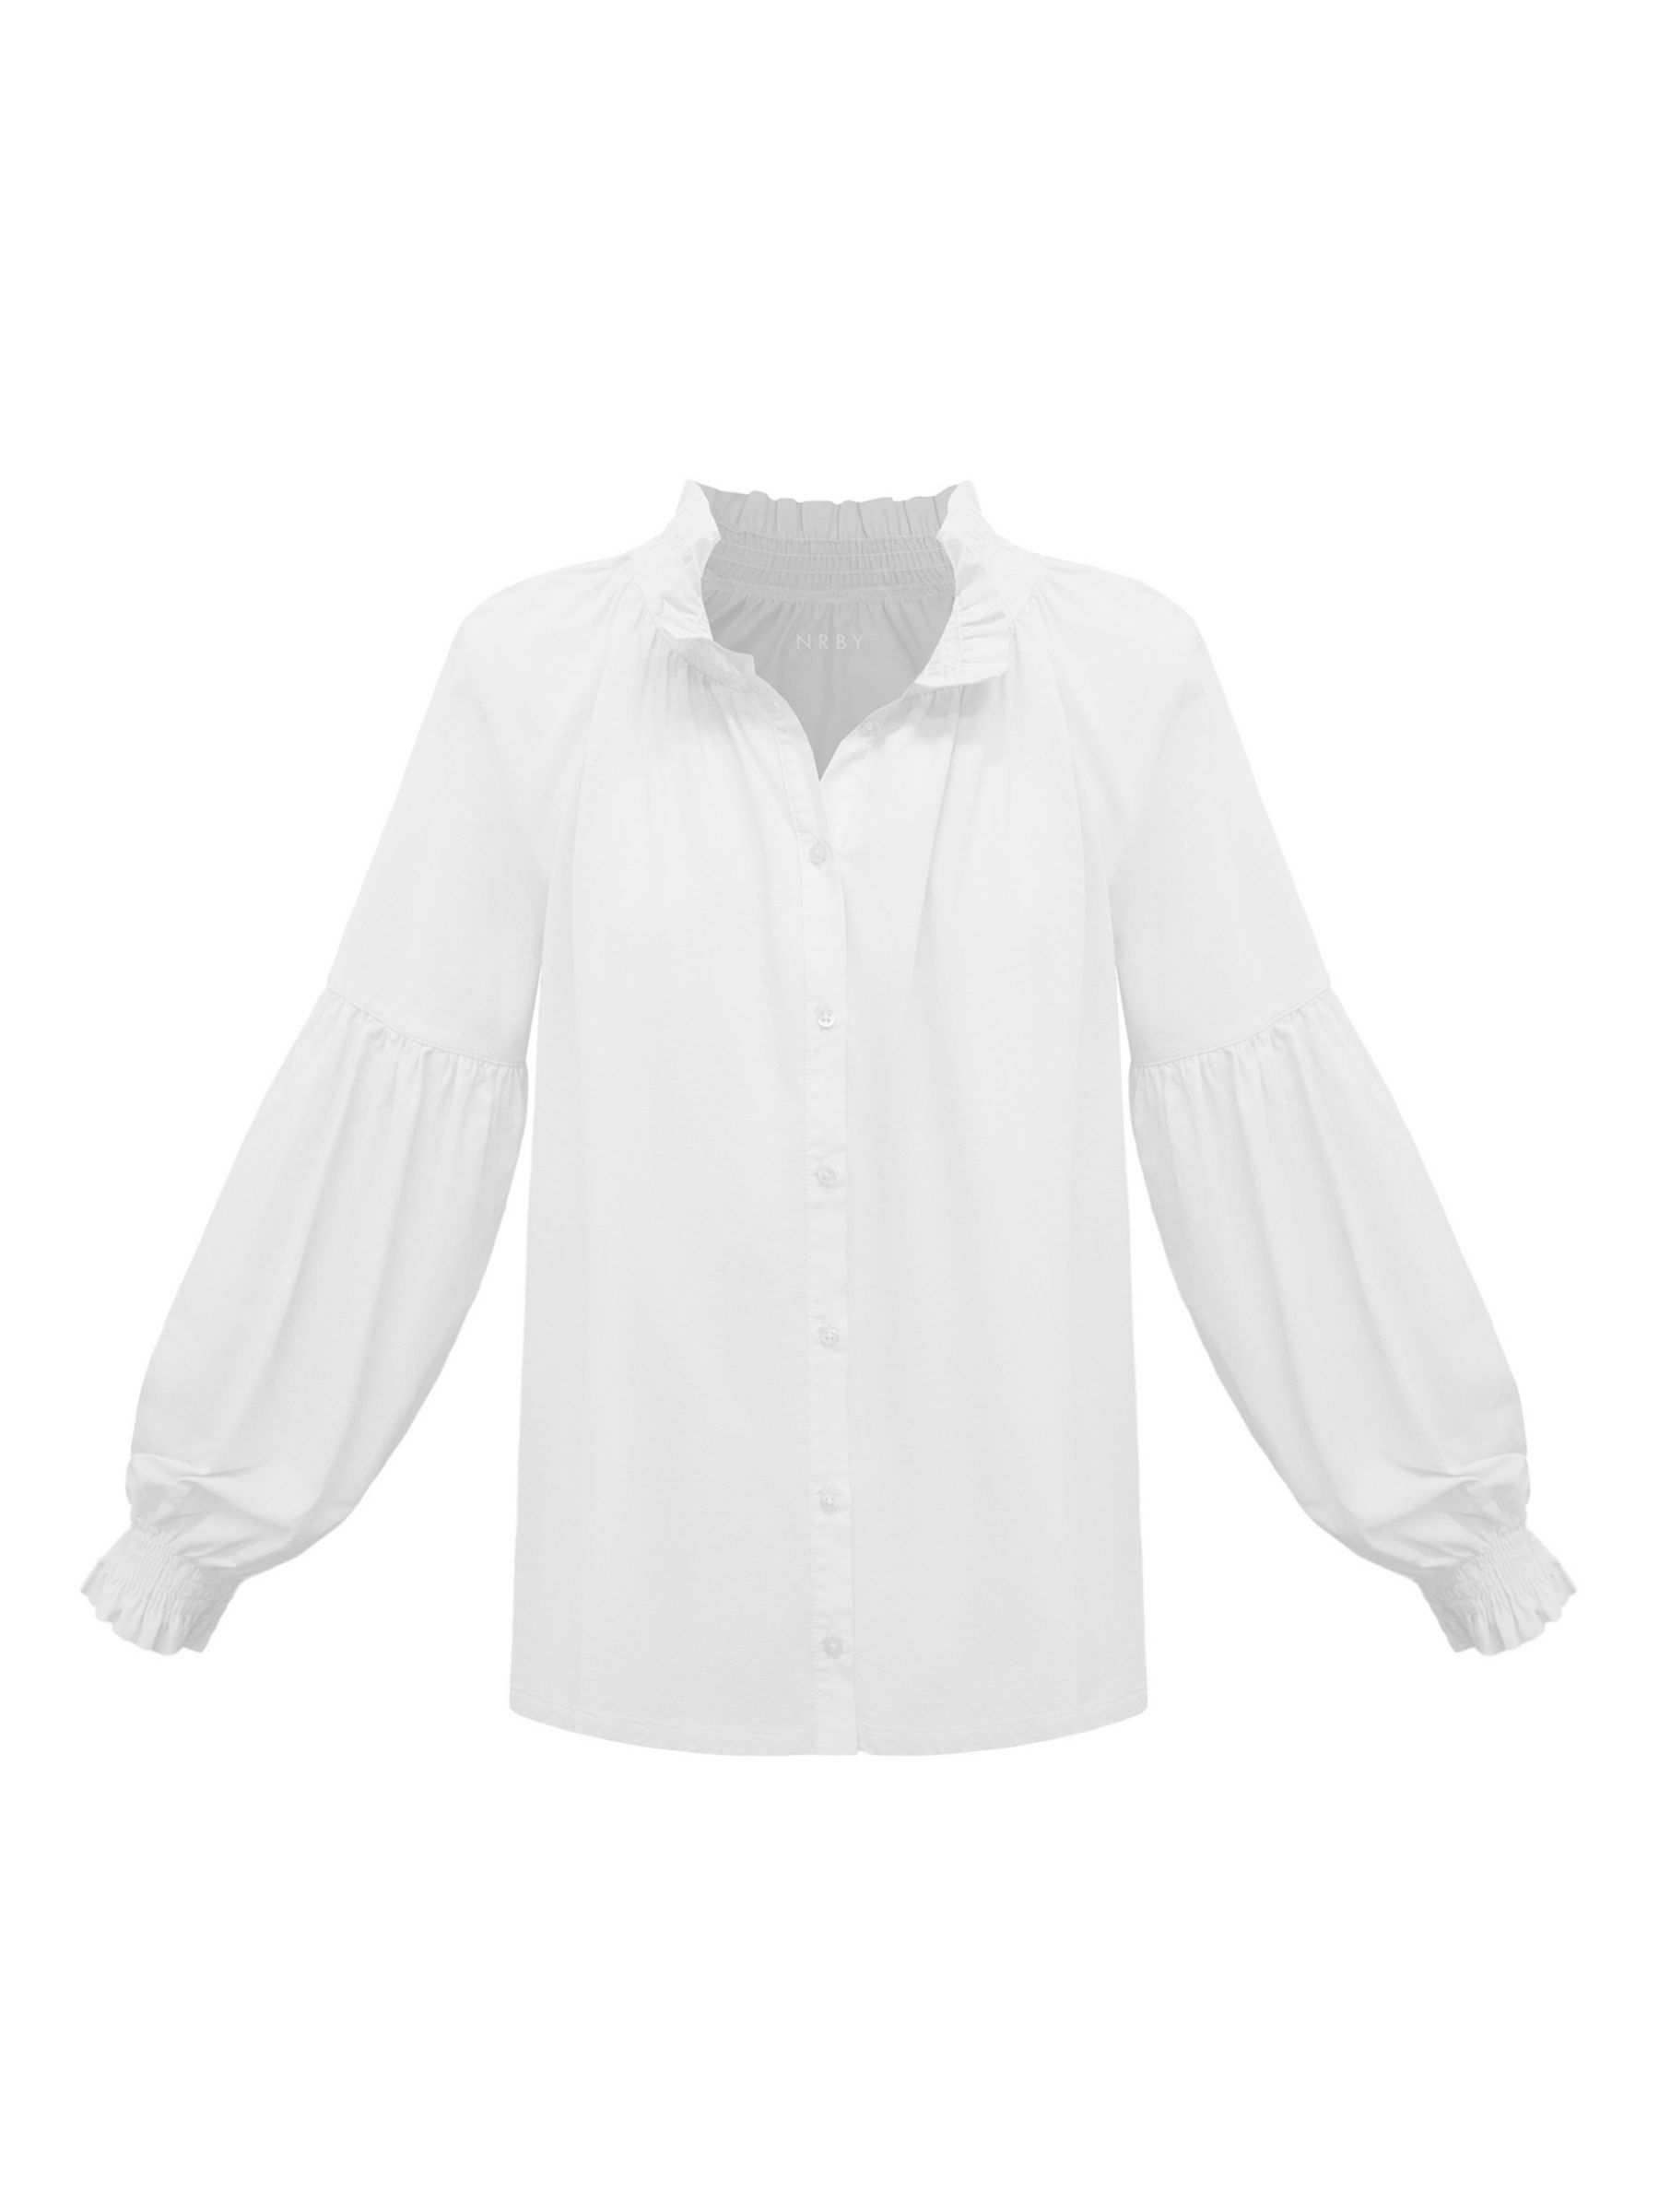 NRBY Esther Cotton Oversized Shirt, White, M